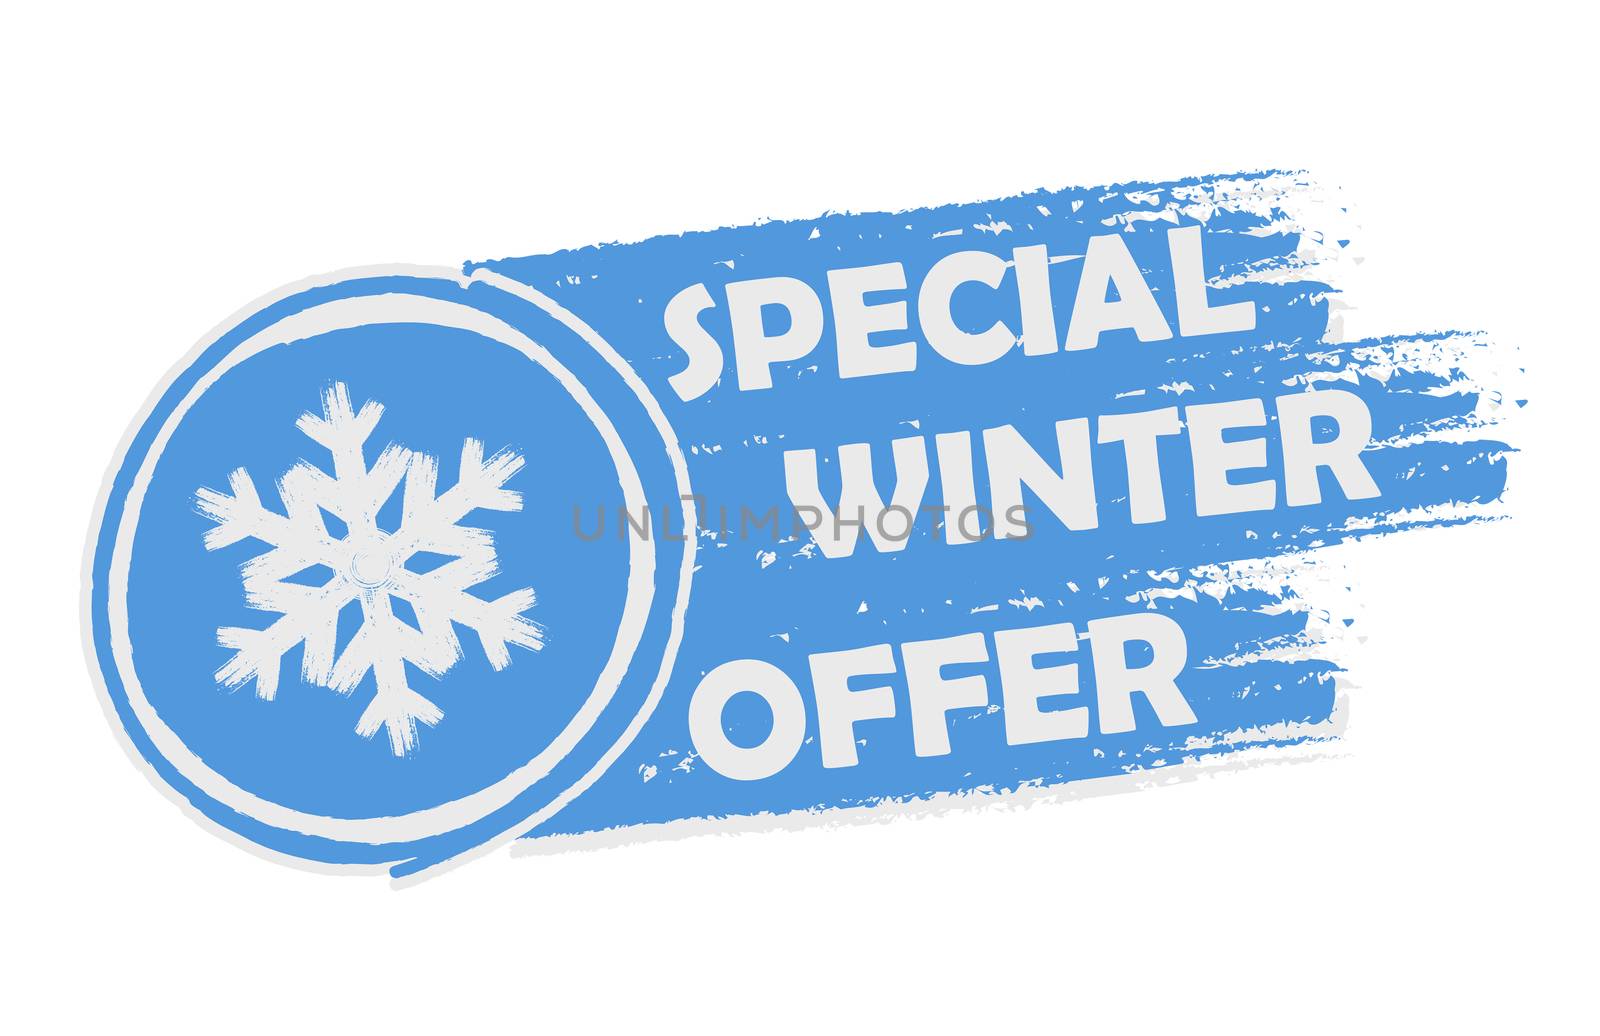 special winter offer with snowflake sign banner - text and symbol in drawn label, business seasonal shopping concept